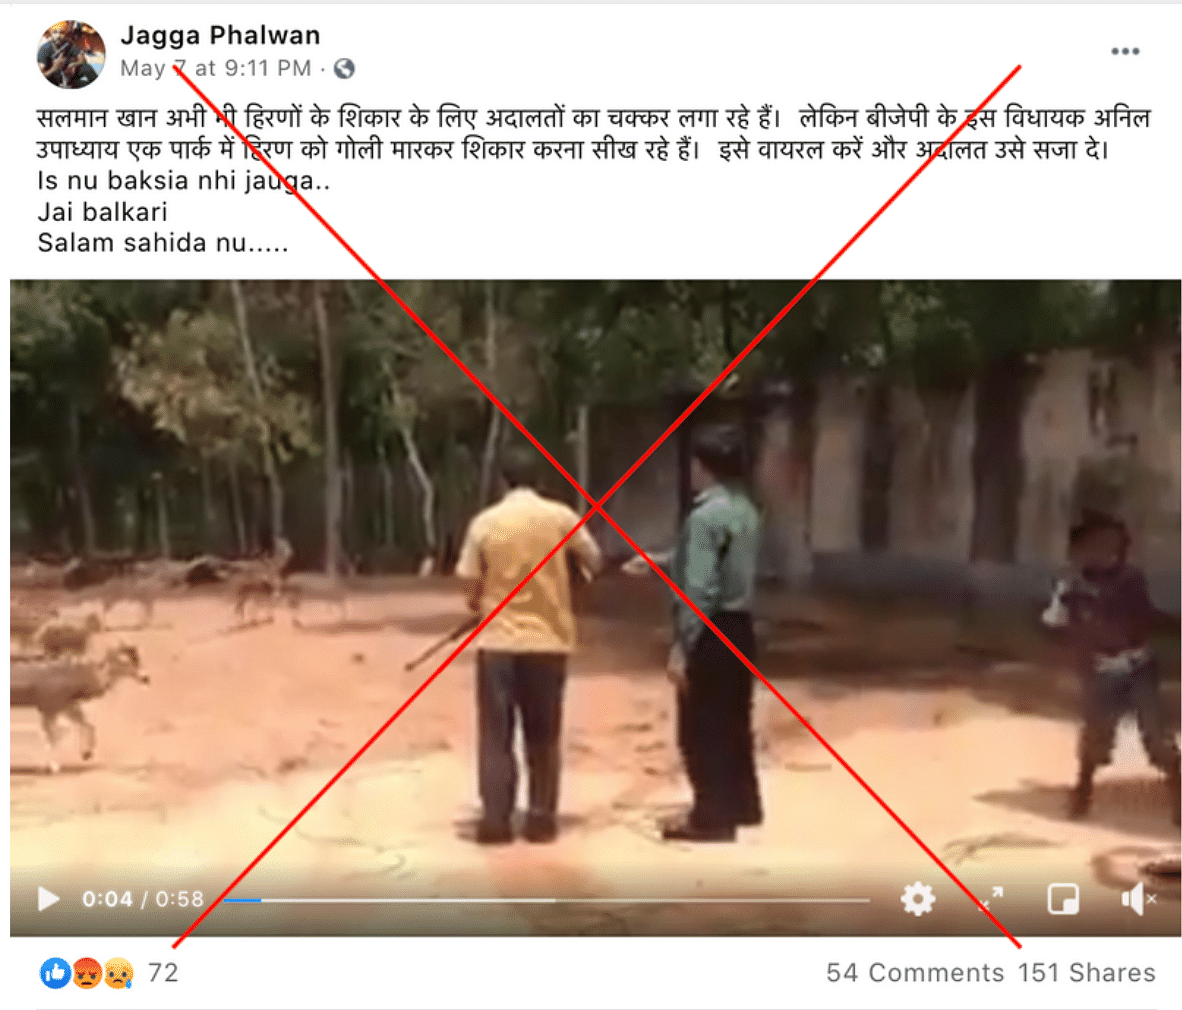 It is an old video from Bangladesh and the person seen in the video had been identified as one Moin Uddin.